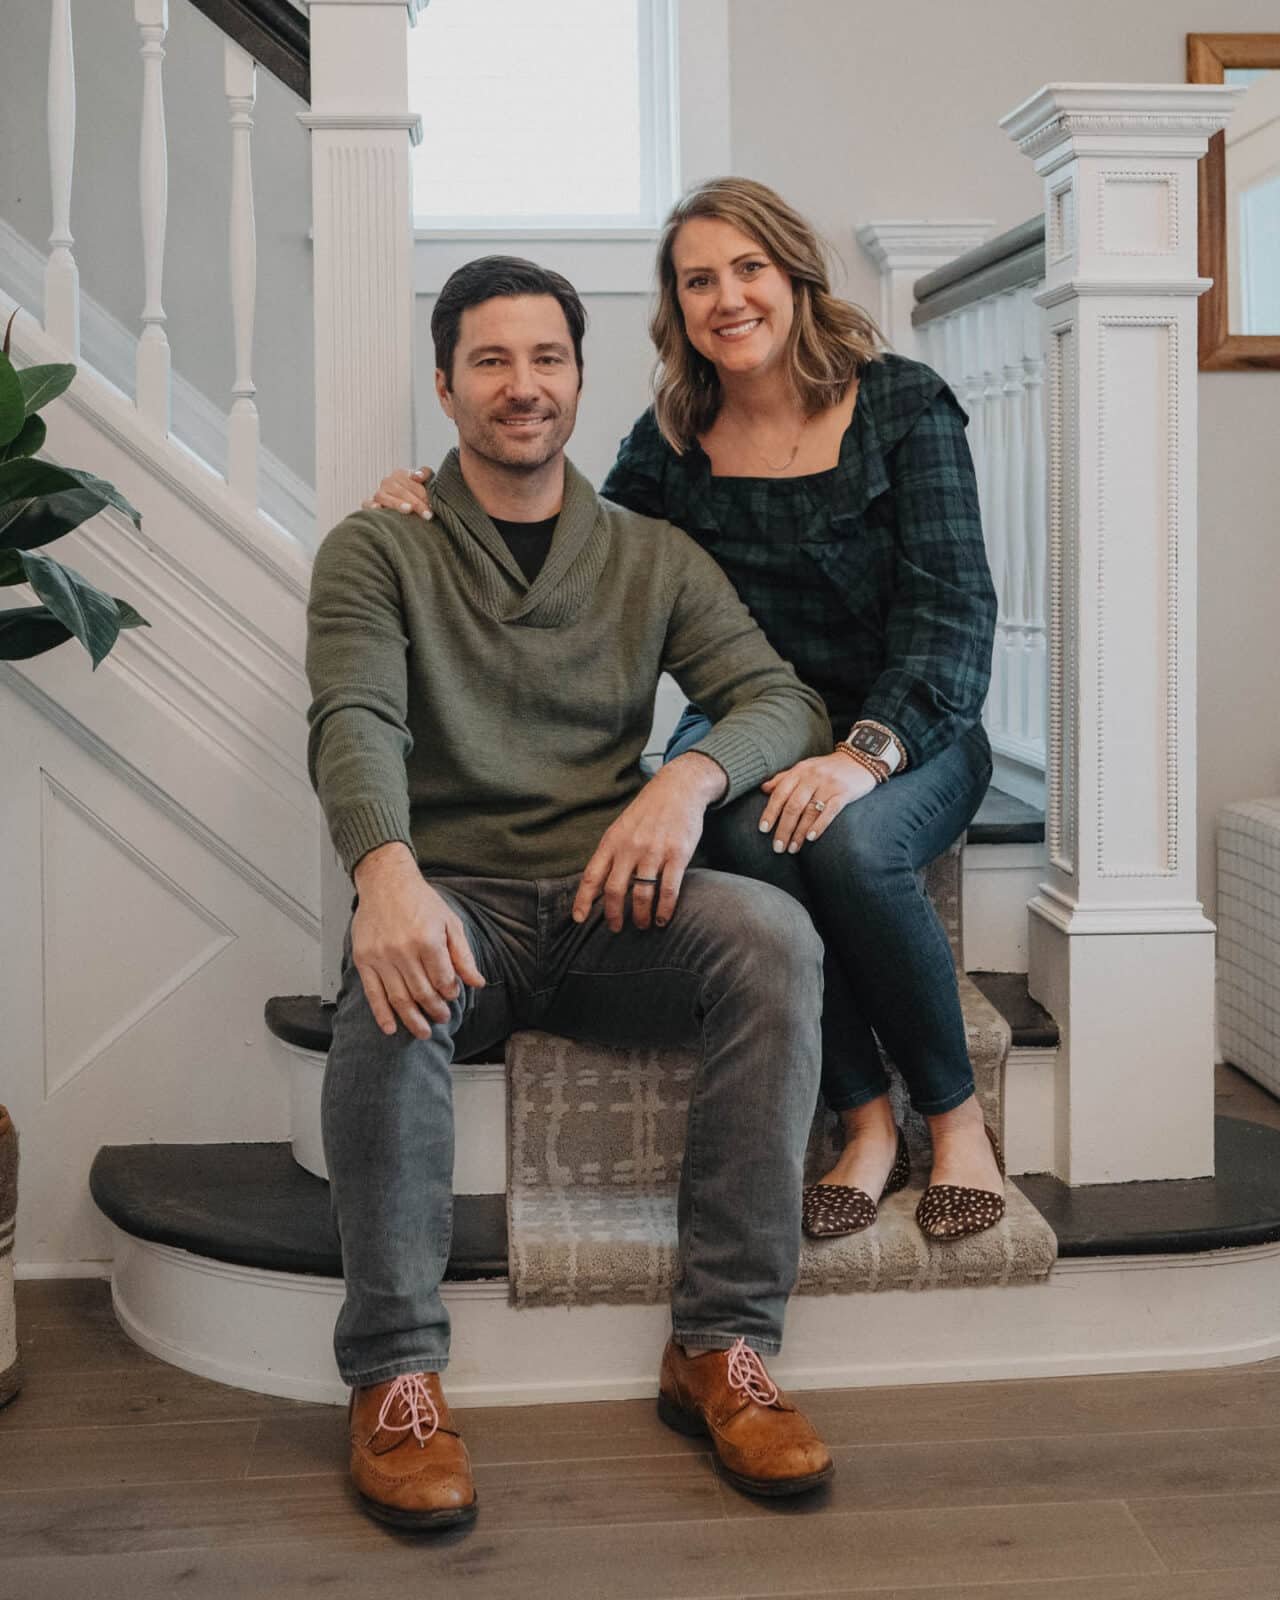 Paul and Rebecca sit on the stairs of a newly rehabbed home.